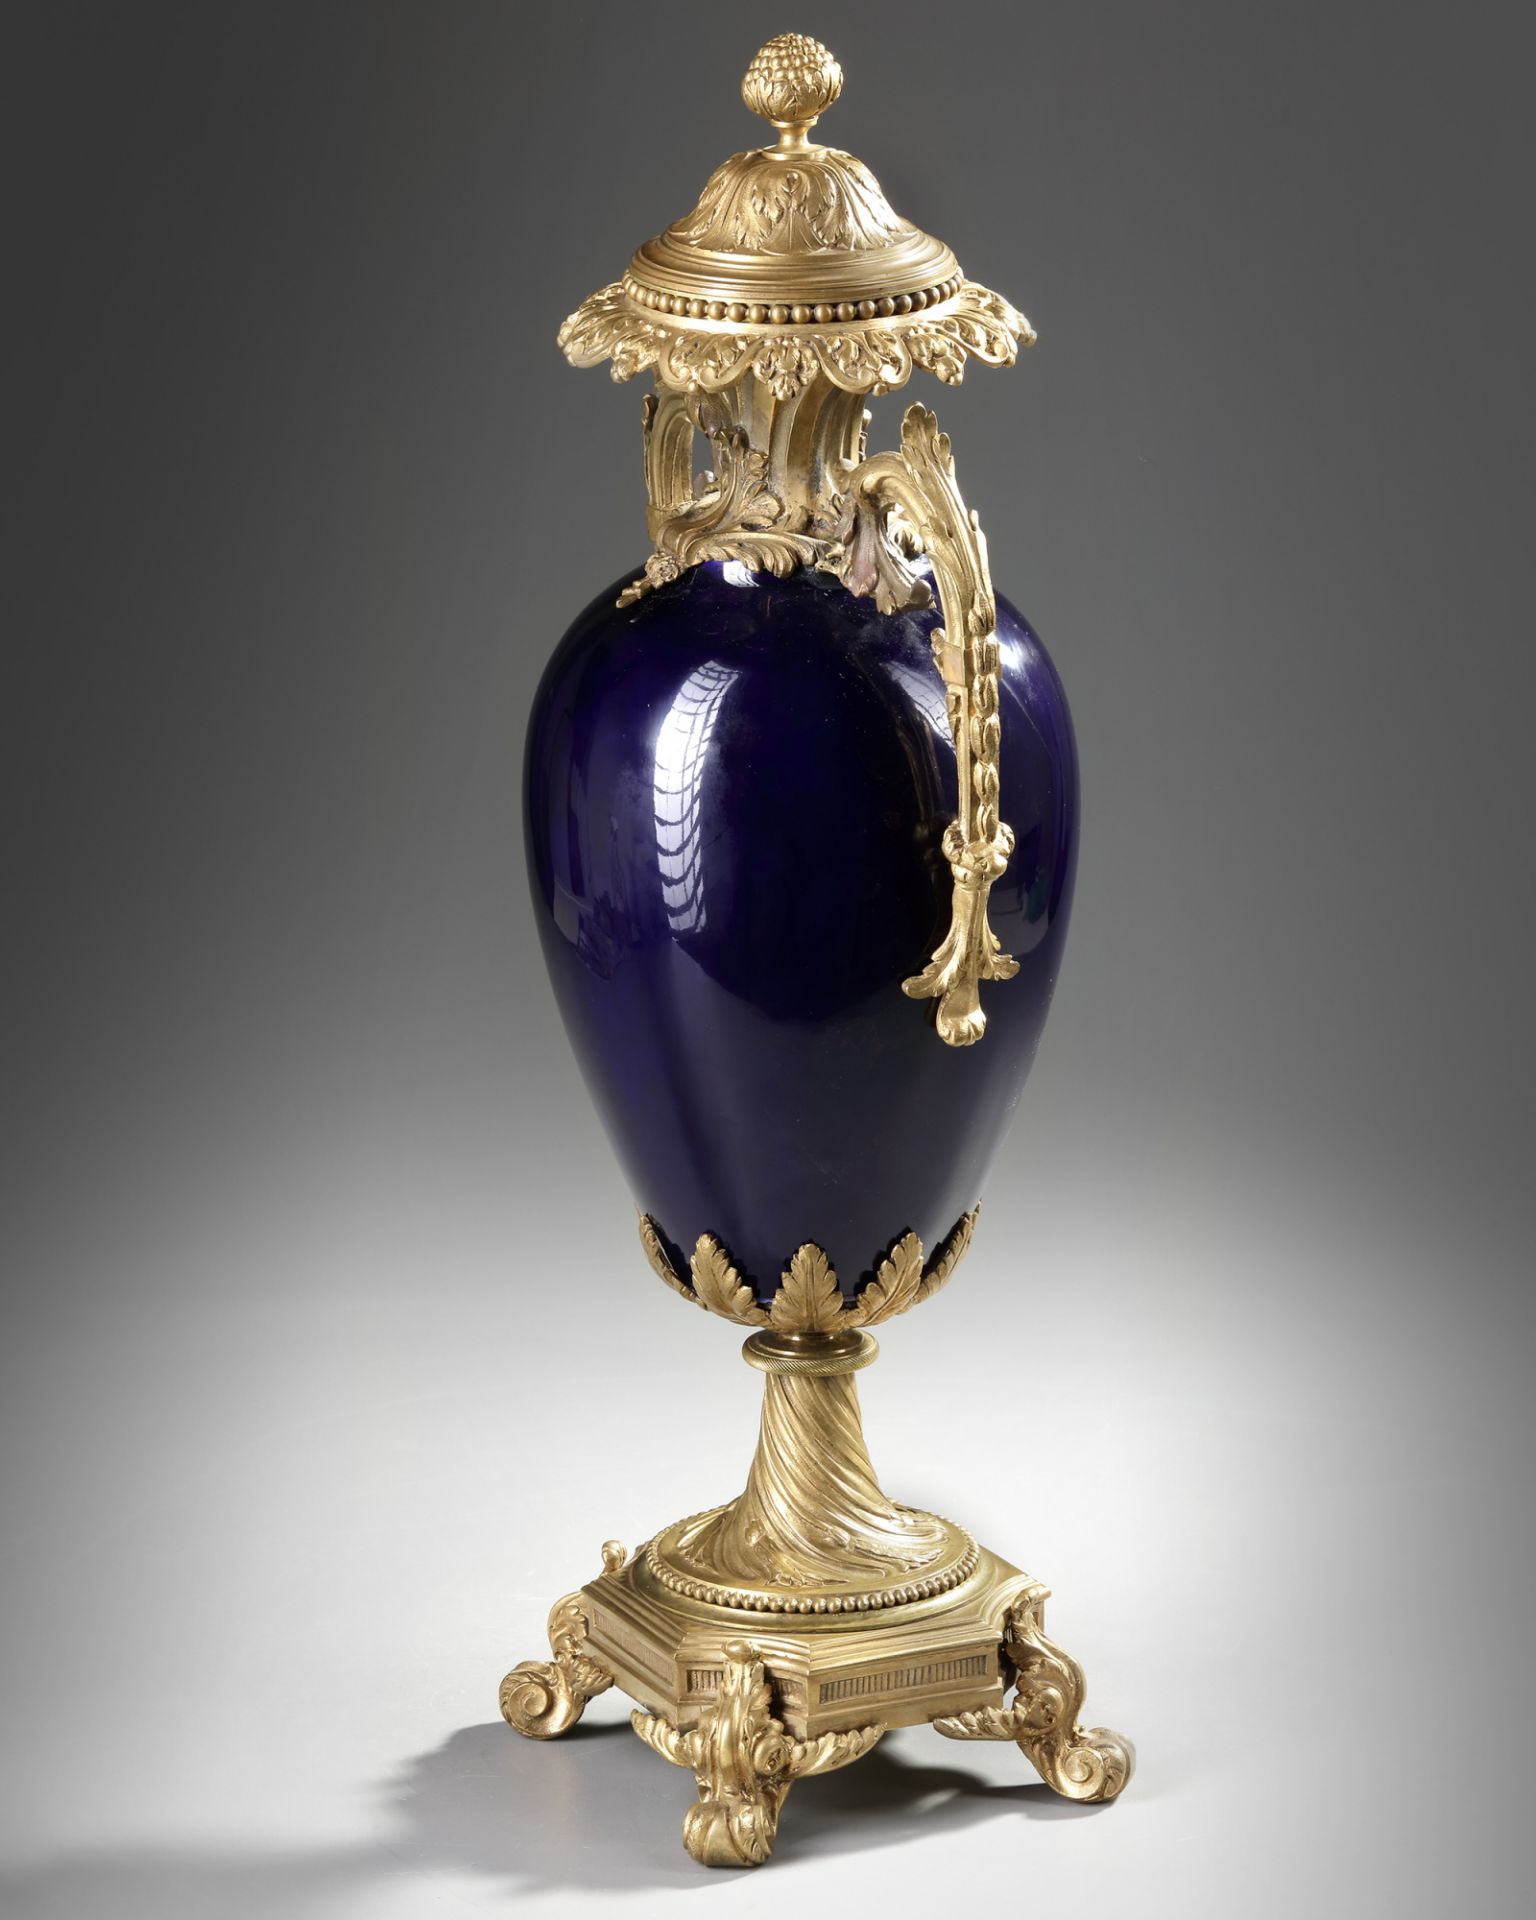 A GILT BRONZE MOUNTED SEVRES STYLE PORCELAIN VASE, 19TH CENTURY - Image 3 of 3